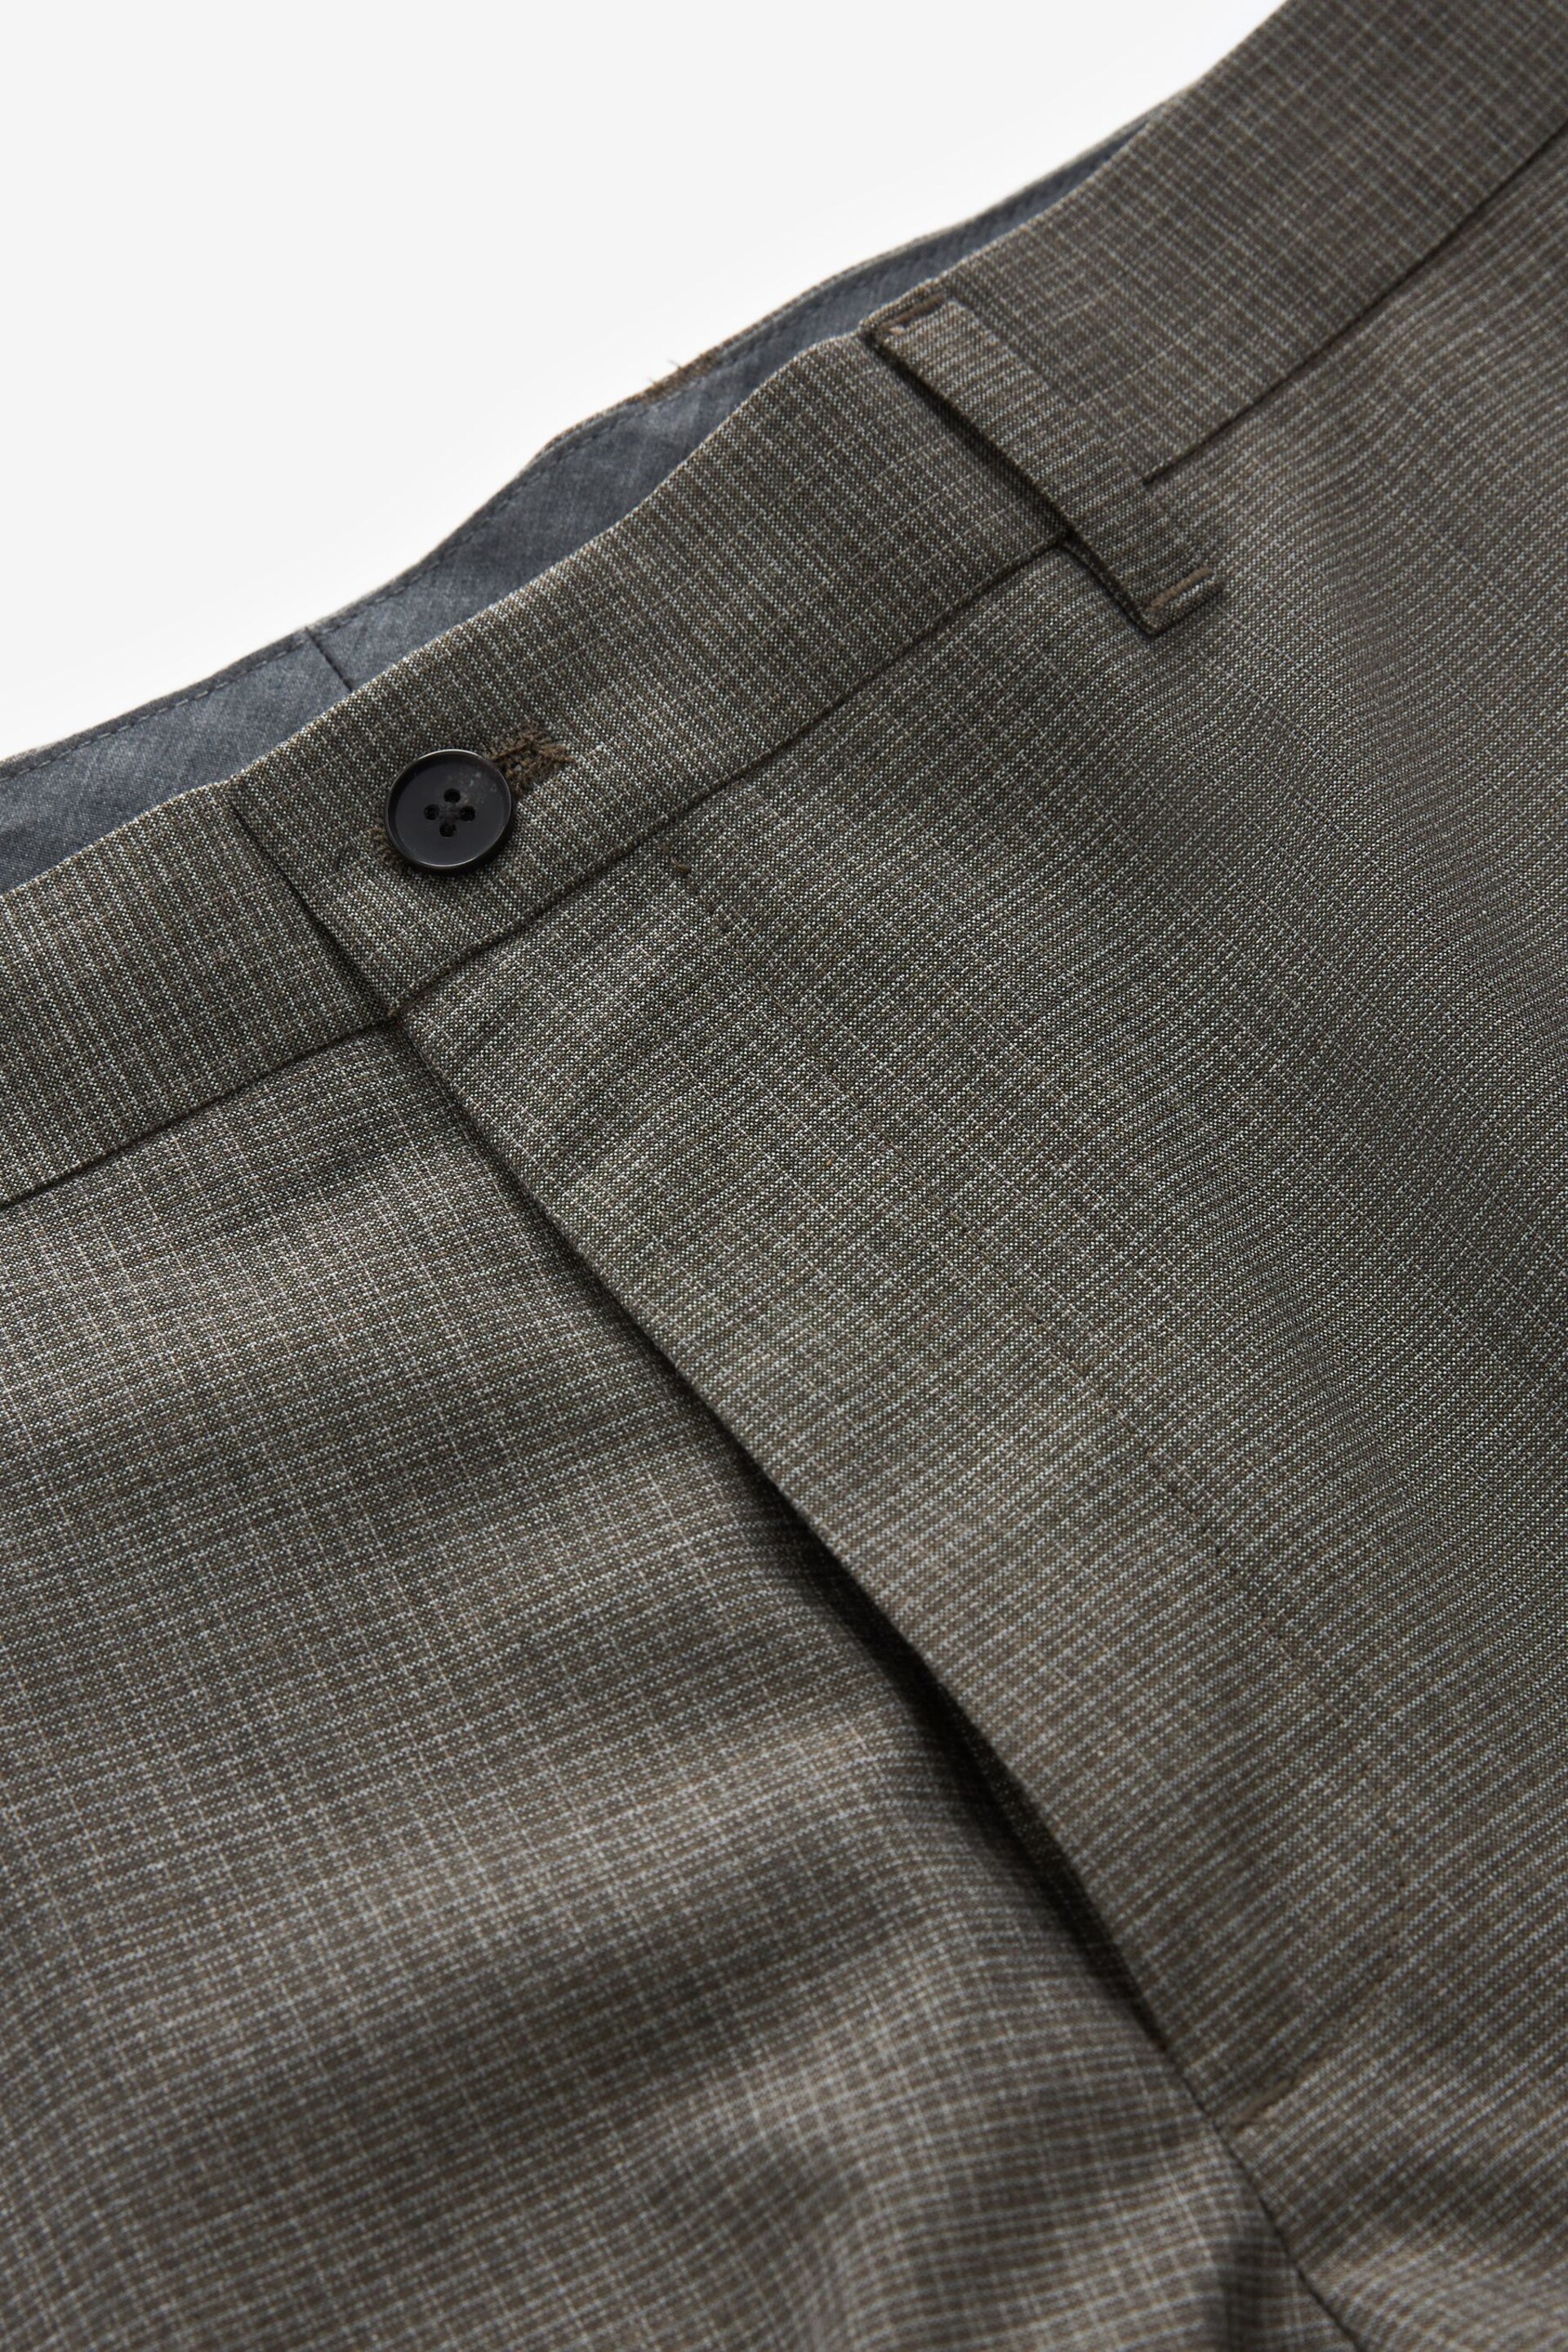 Neutral Textured Smart Trousers - Image 6 of 8